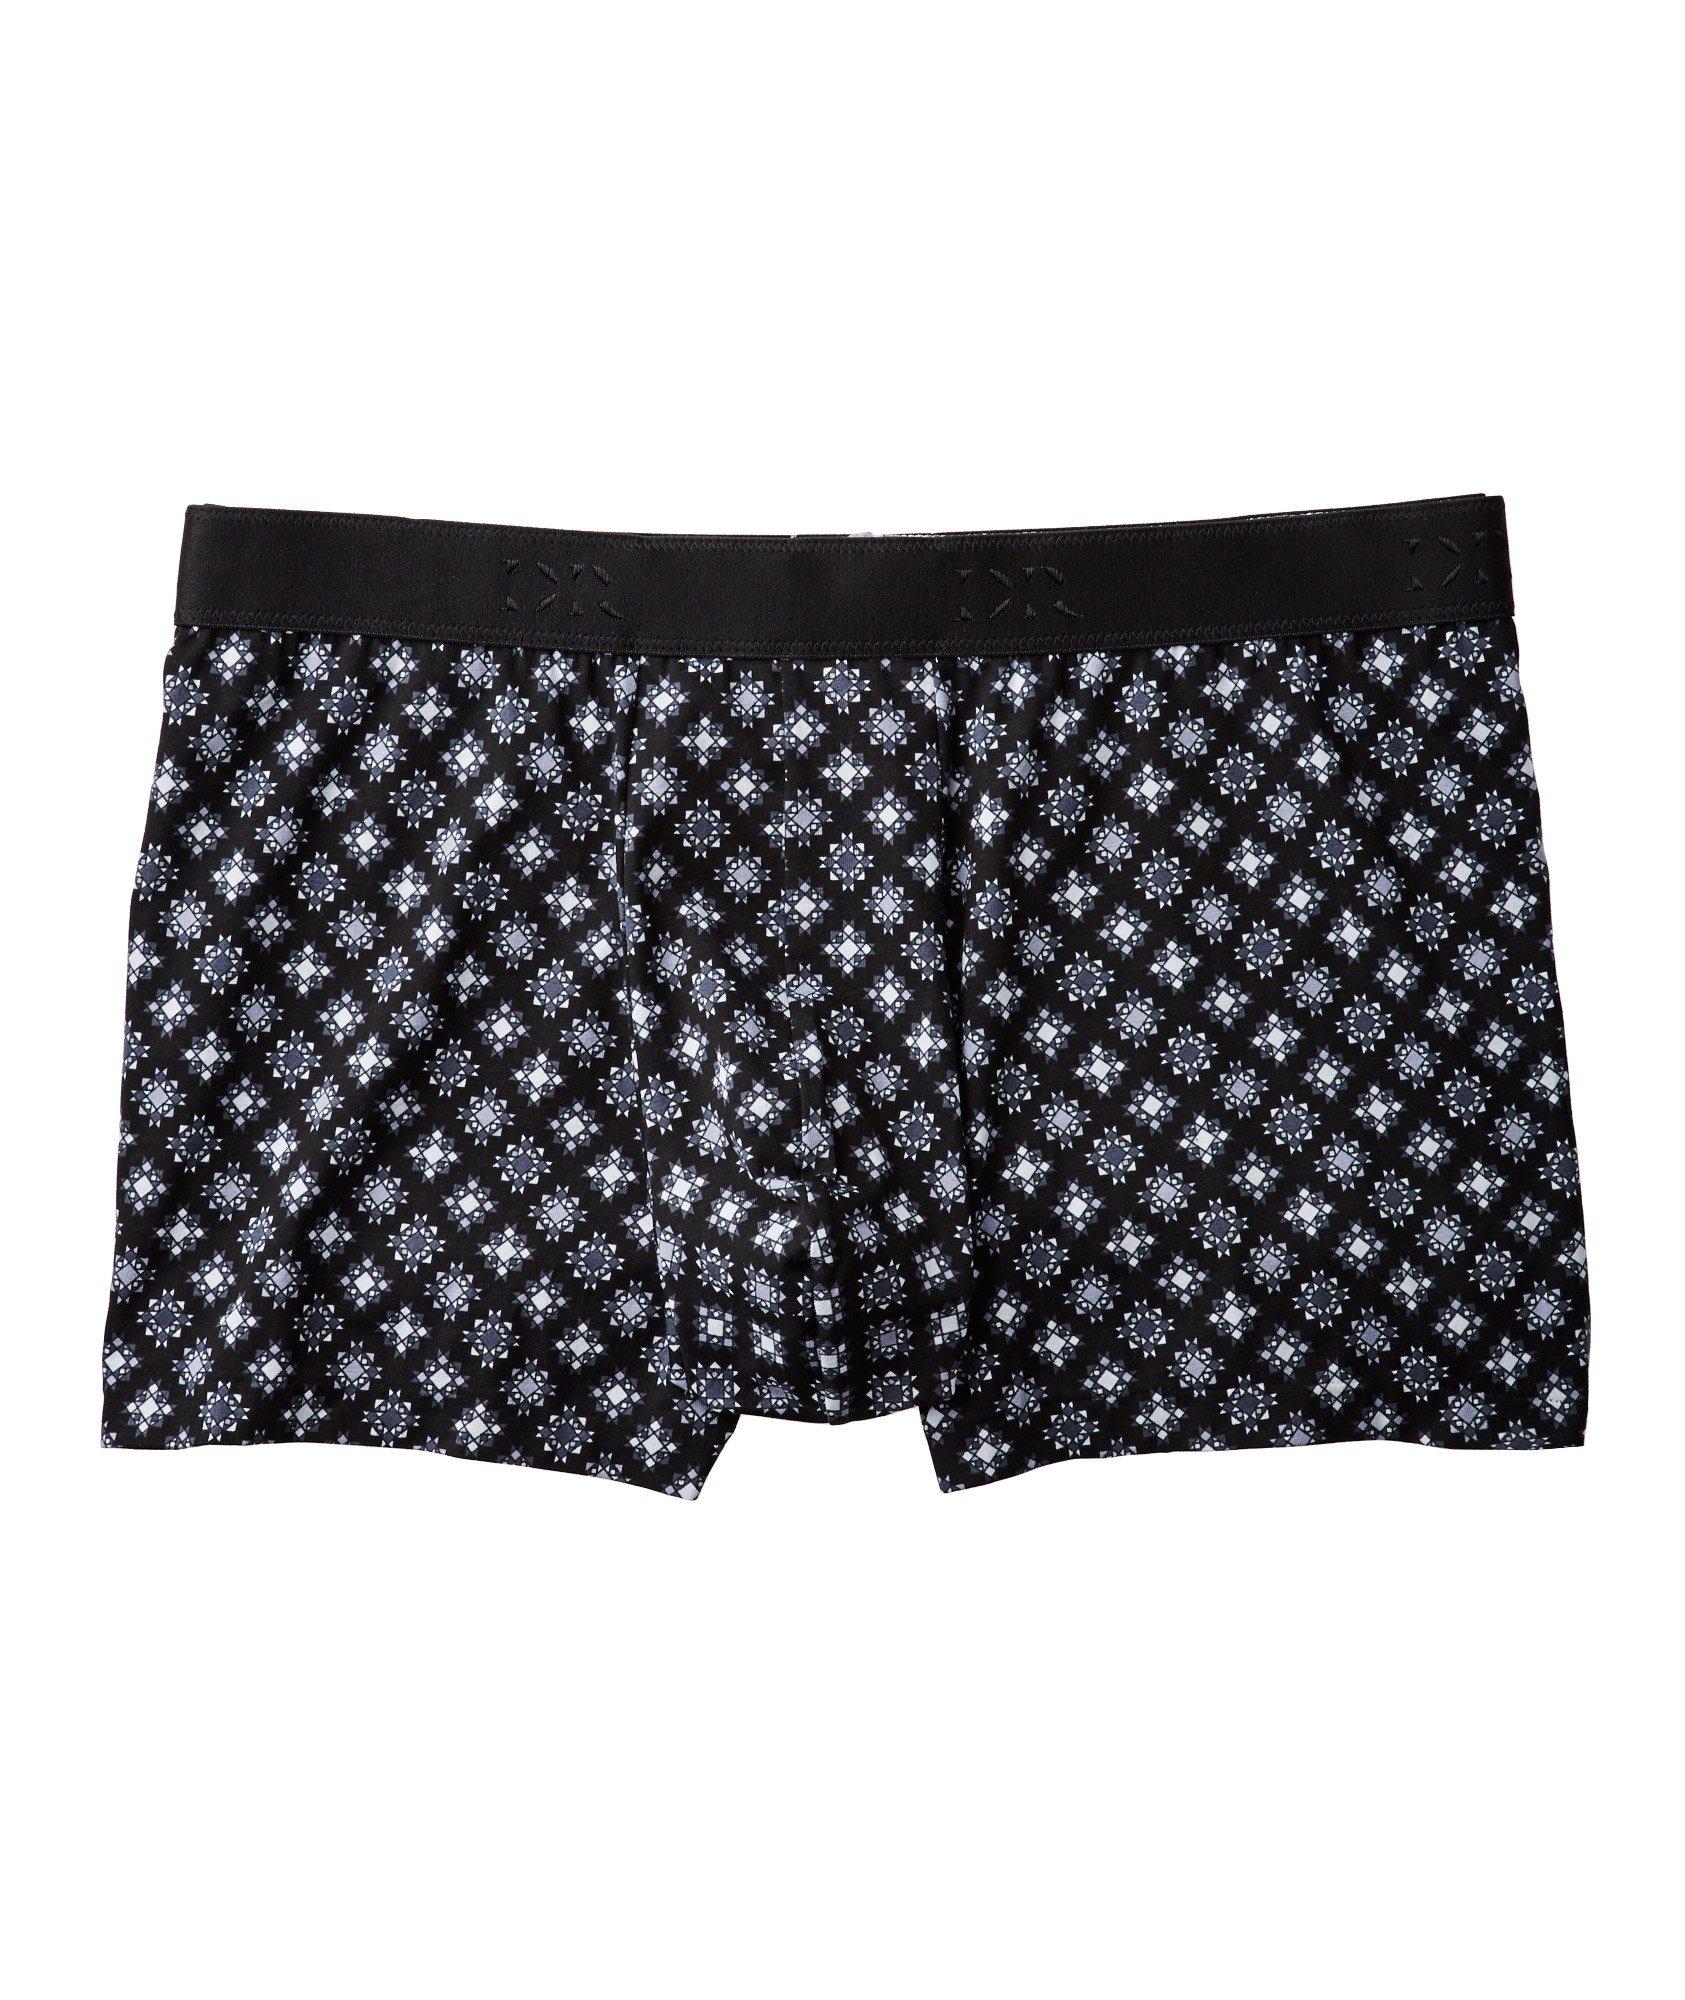 Closed Hipster Boxer Brief image 0